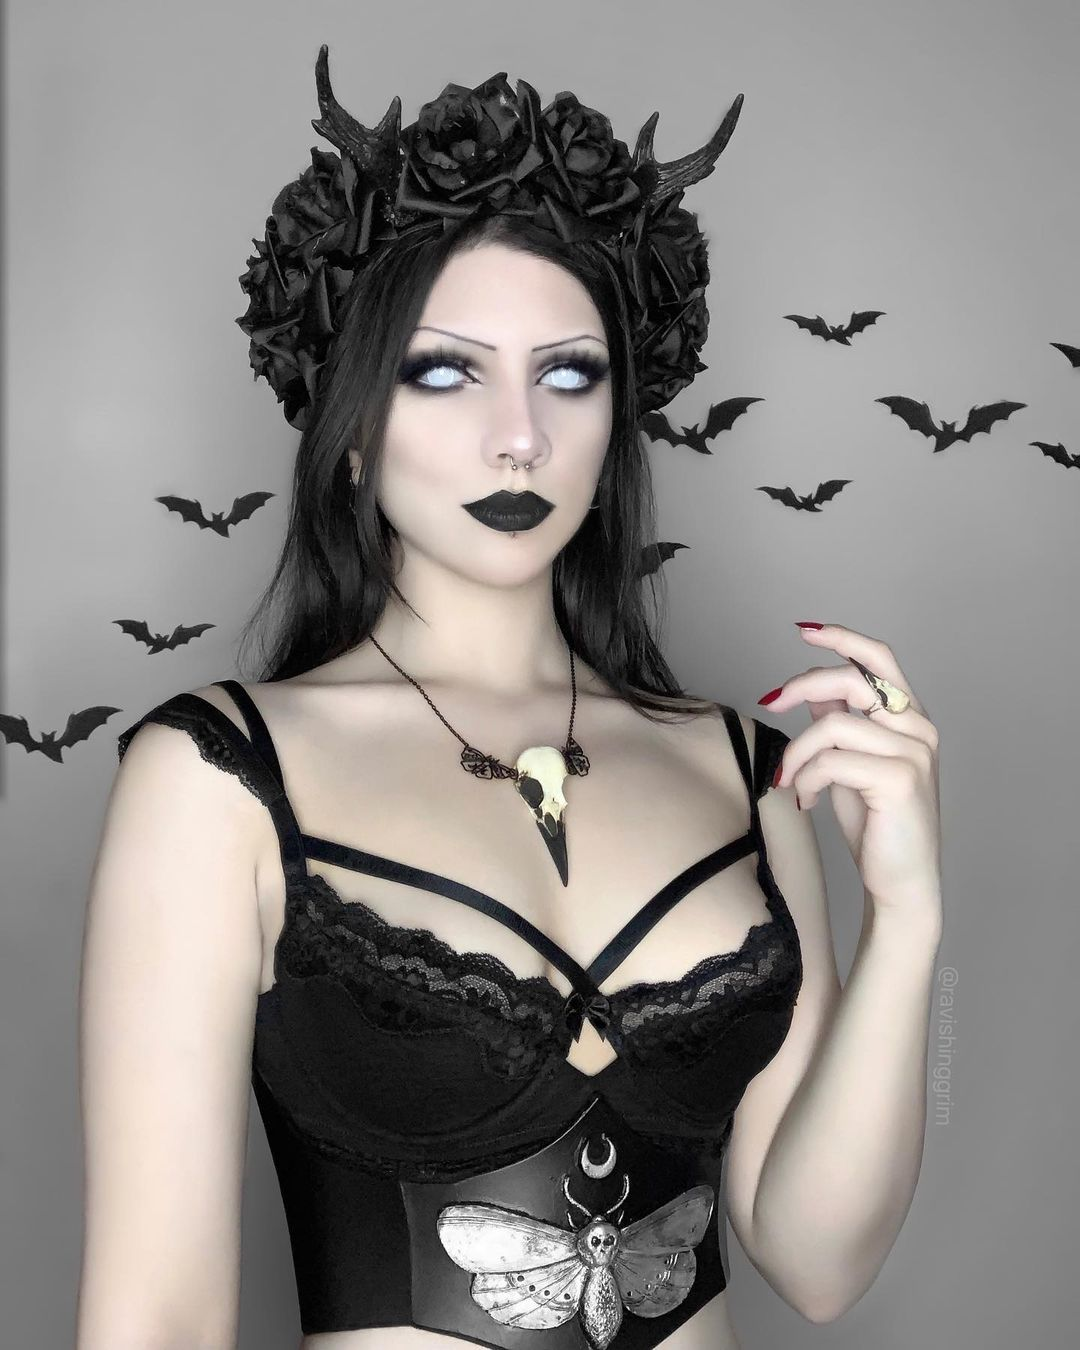 raven skull necklace bird skull jewelry worn by gothic model with black bats and a moth